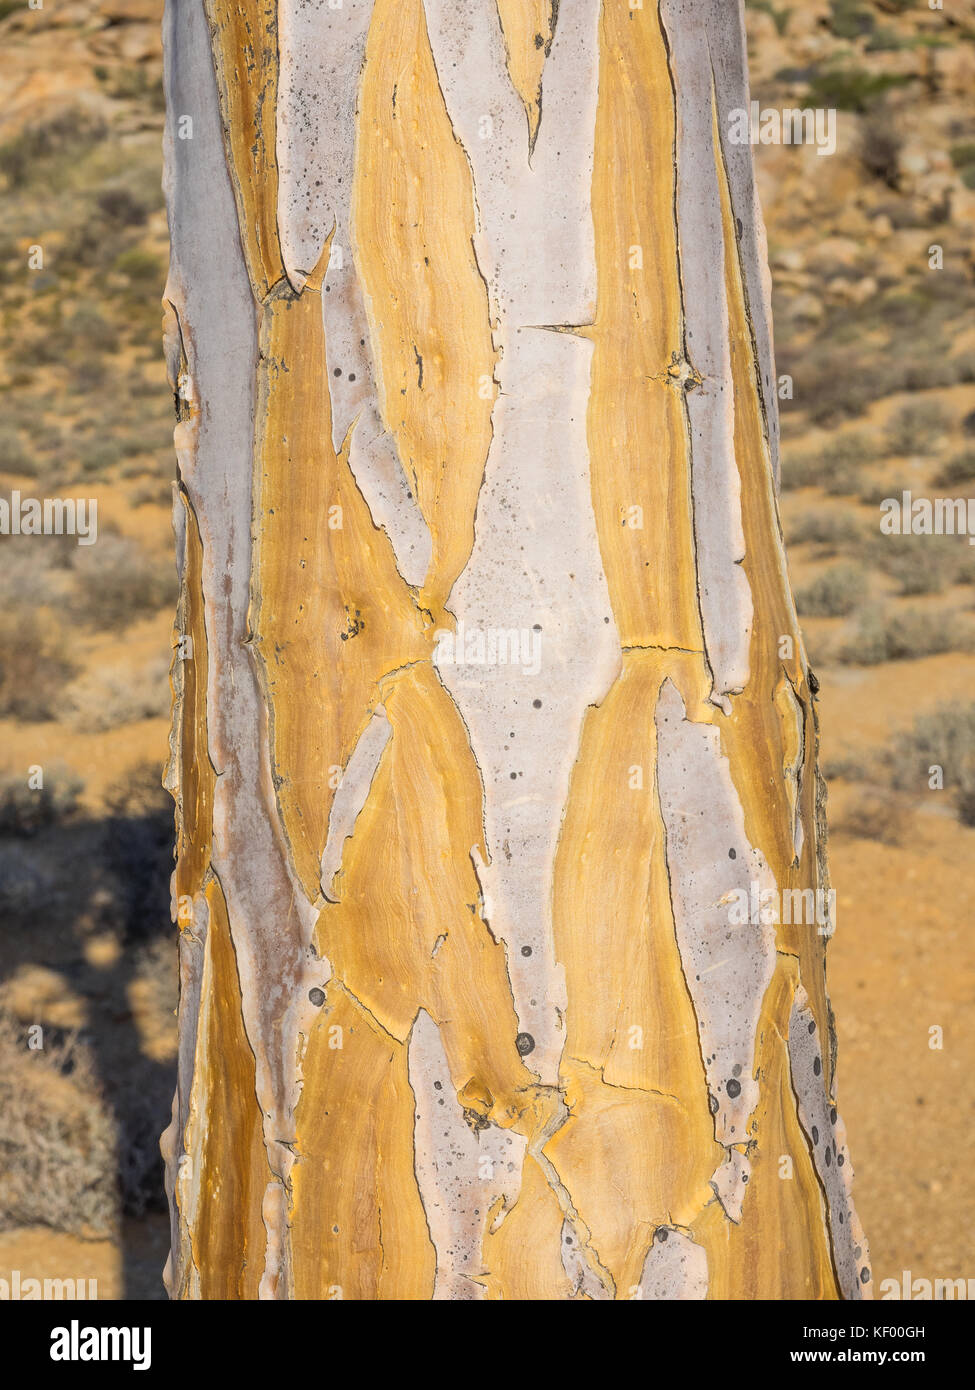 Bark of a Kokerboom or Quiver Tree growing in the Goegap Nature Reserve in the Nothern Cape province of South Africa. Stock Photo